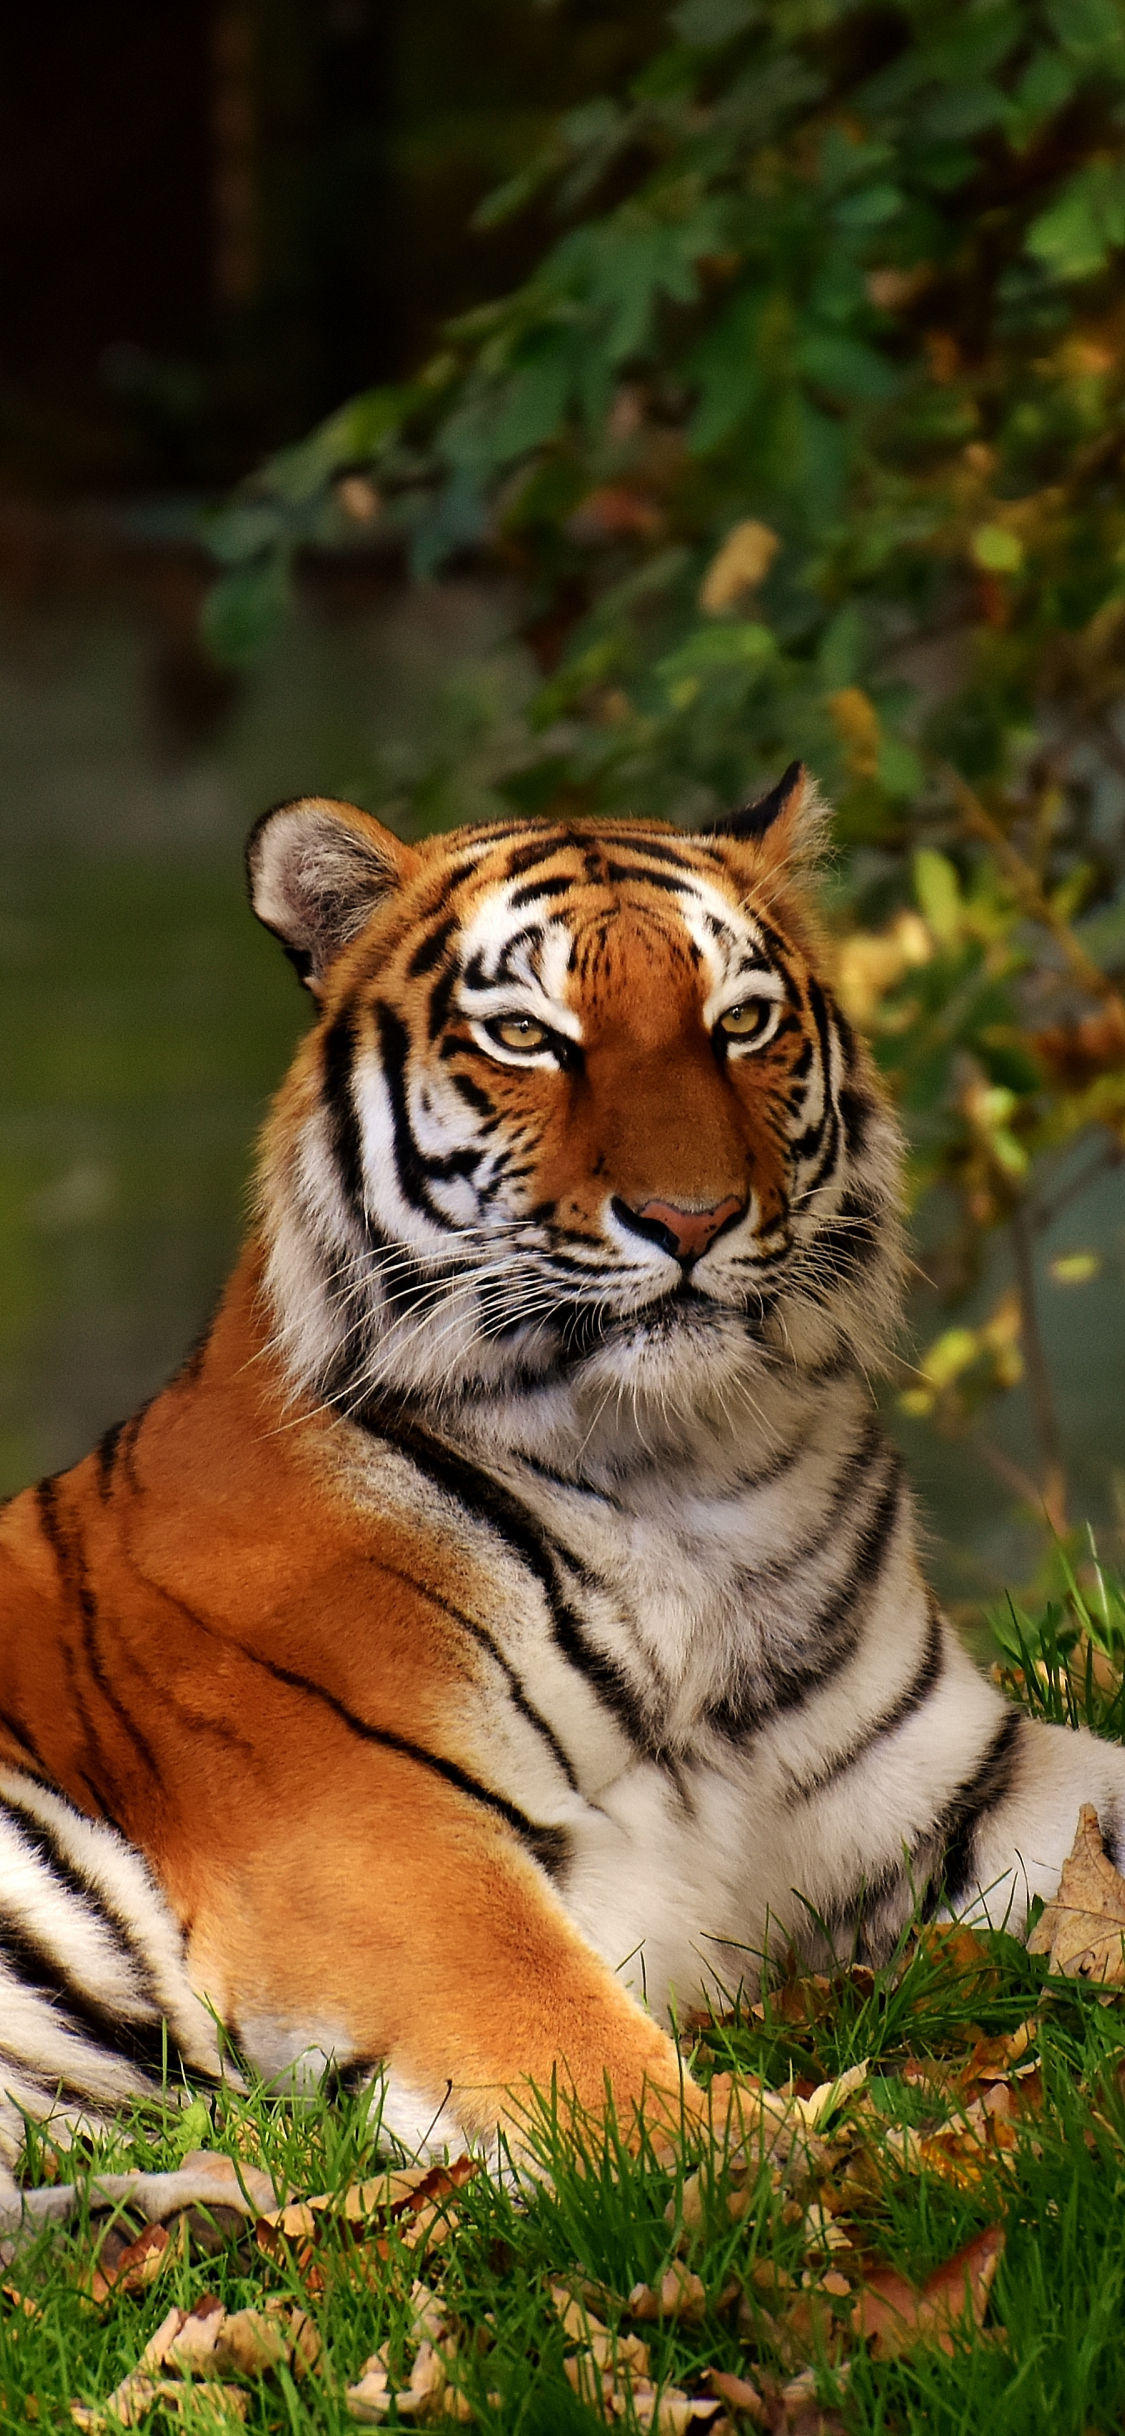 Tiger In The Forest. Beautiful Tiger In The Wild Nature. Free Image and  Photograph 206025432.